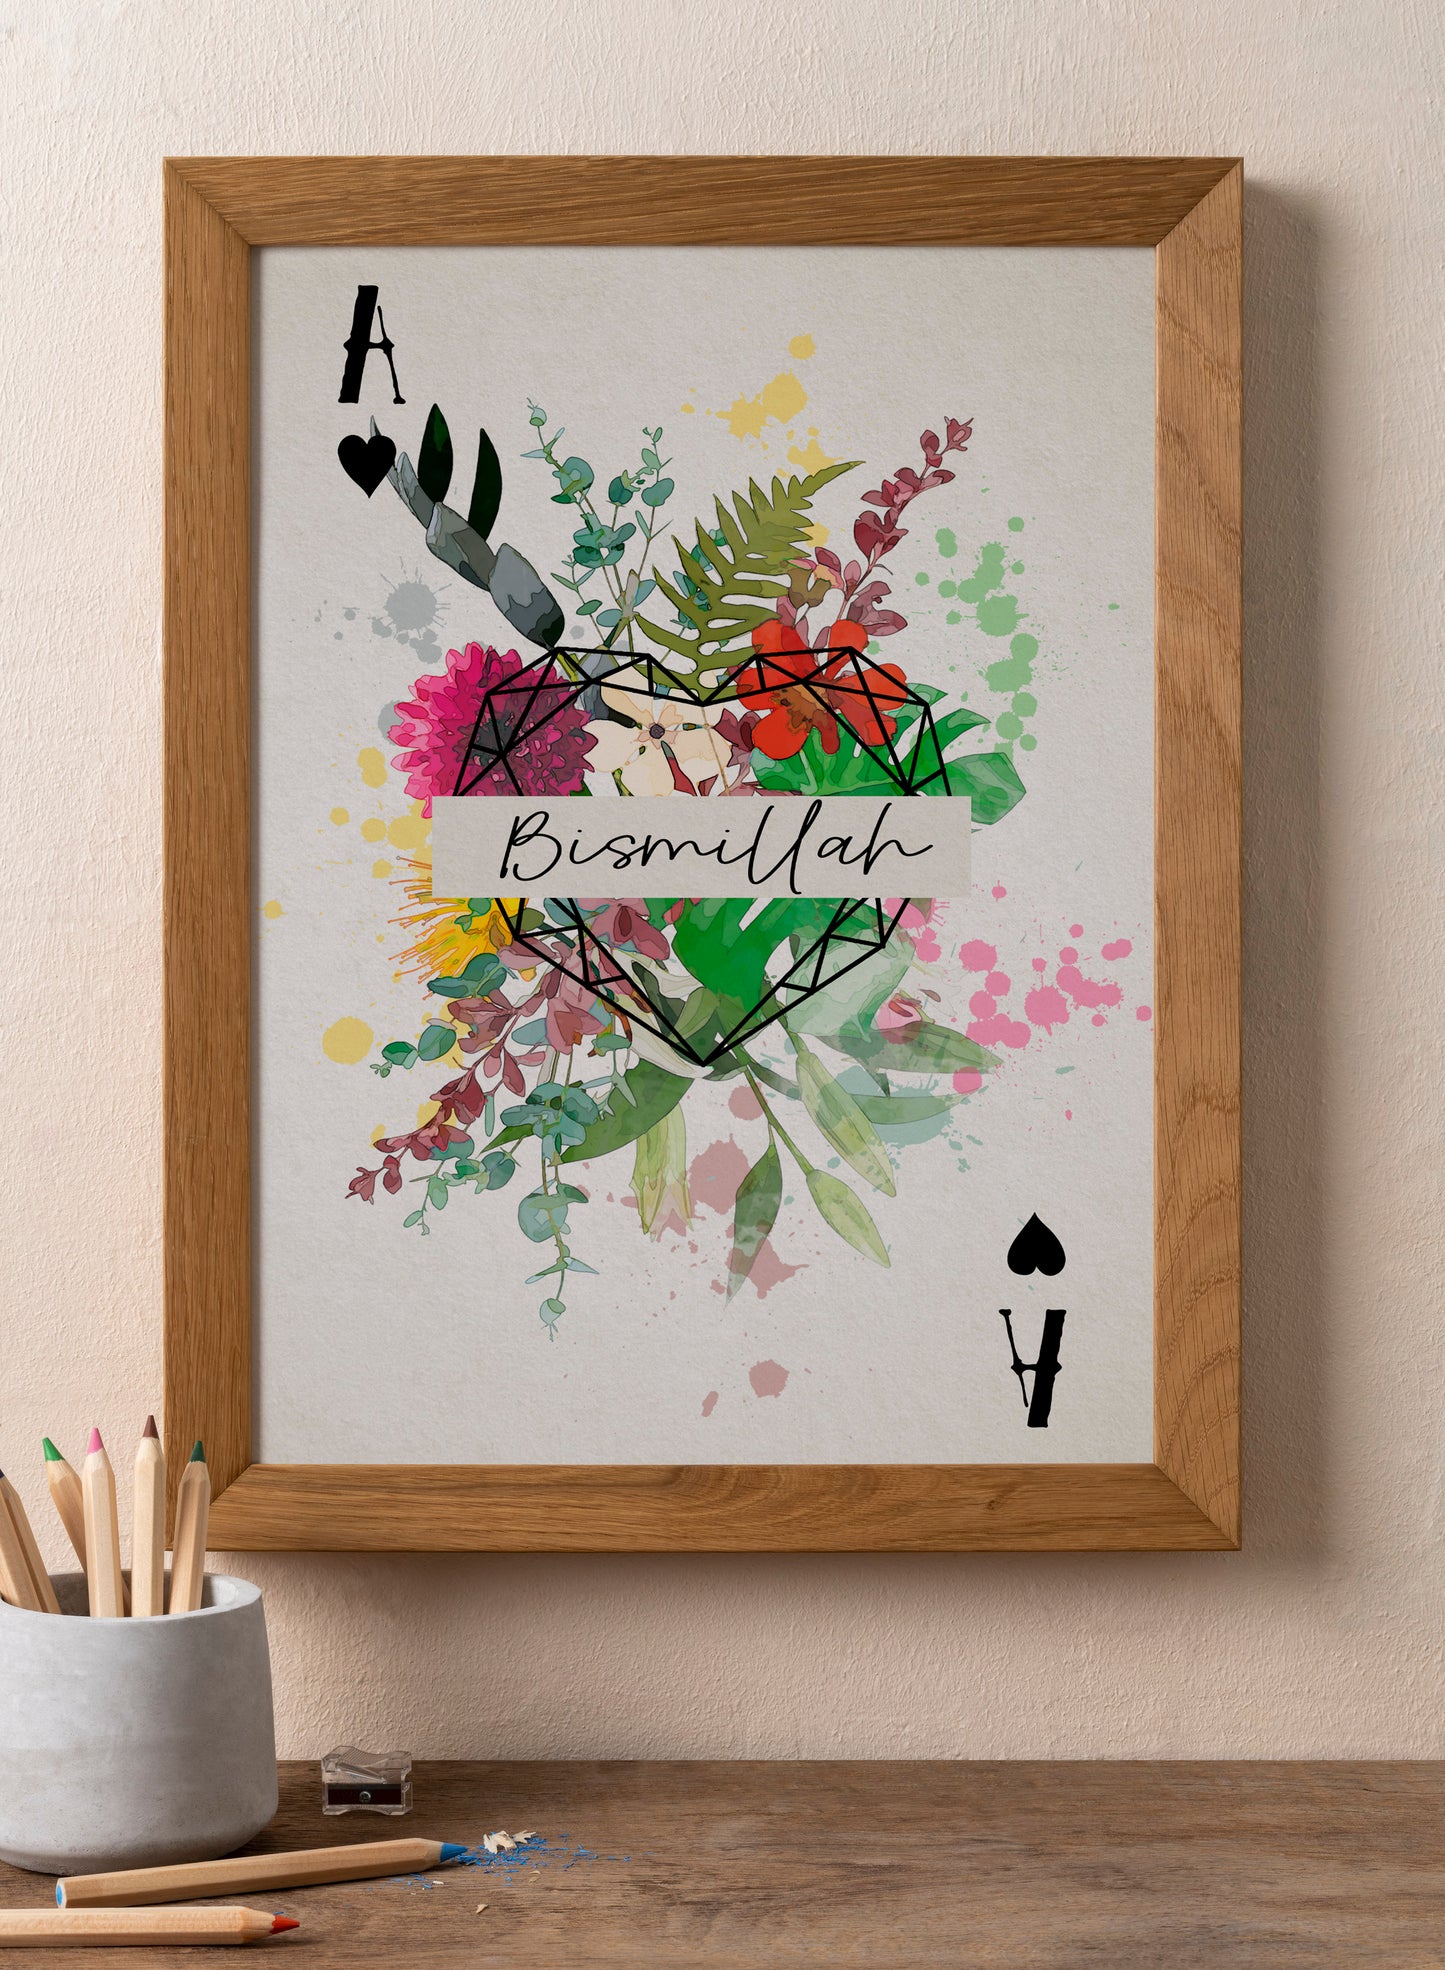 playing card abstract floral art print, watercolour art print, watercolour splash bimillah floral